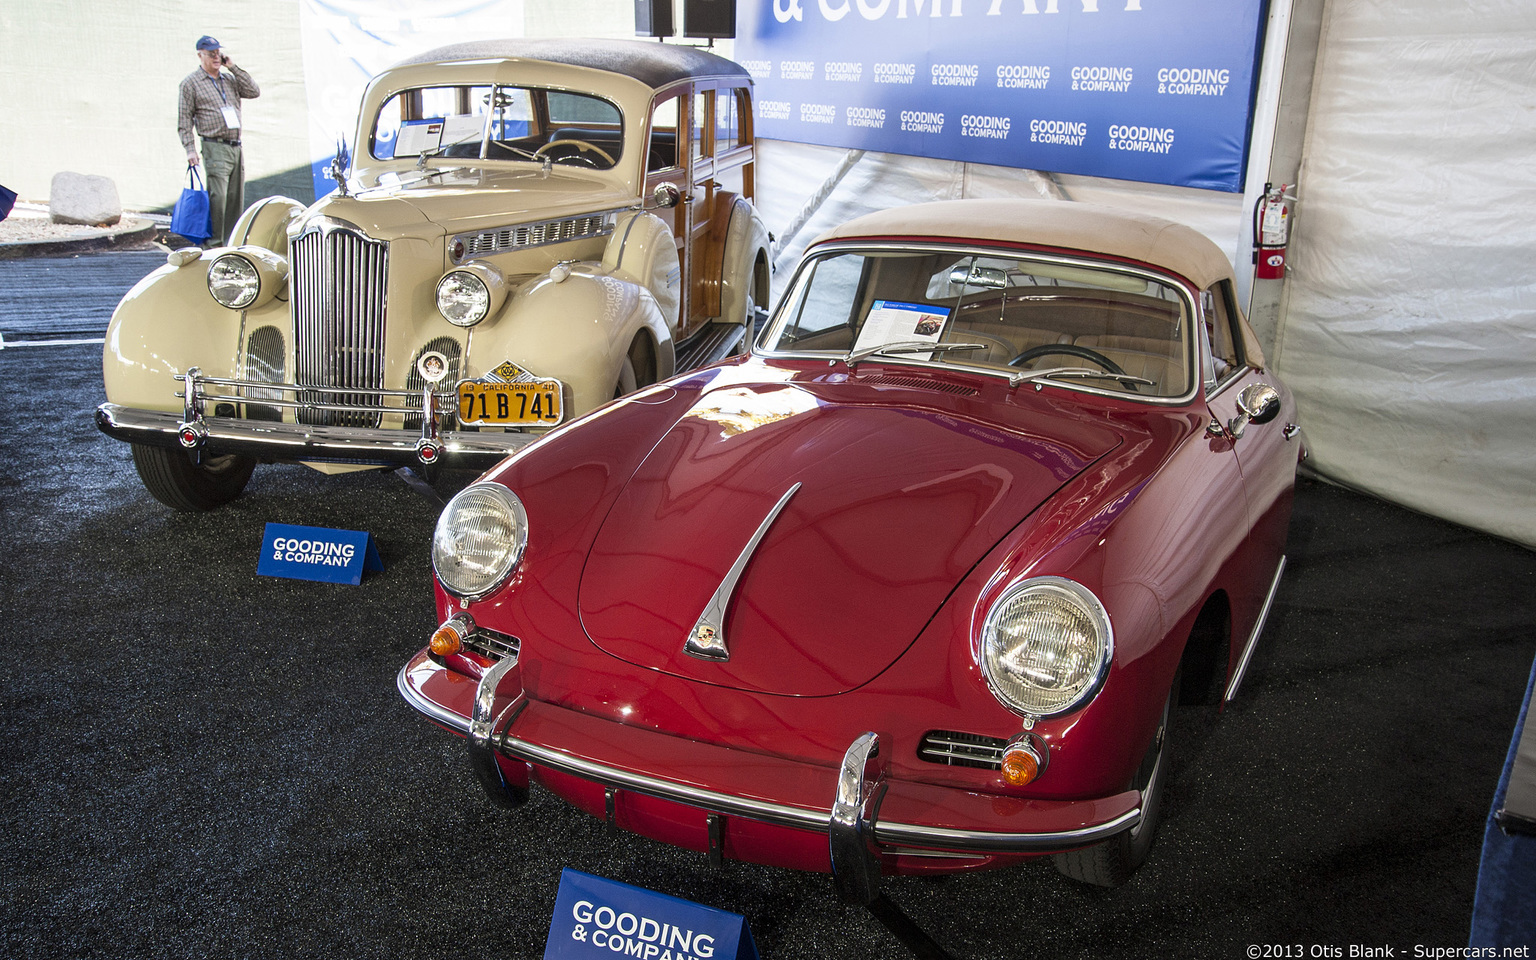 The 2013 Scottsdale Auctions by Gooding & Company